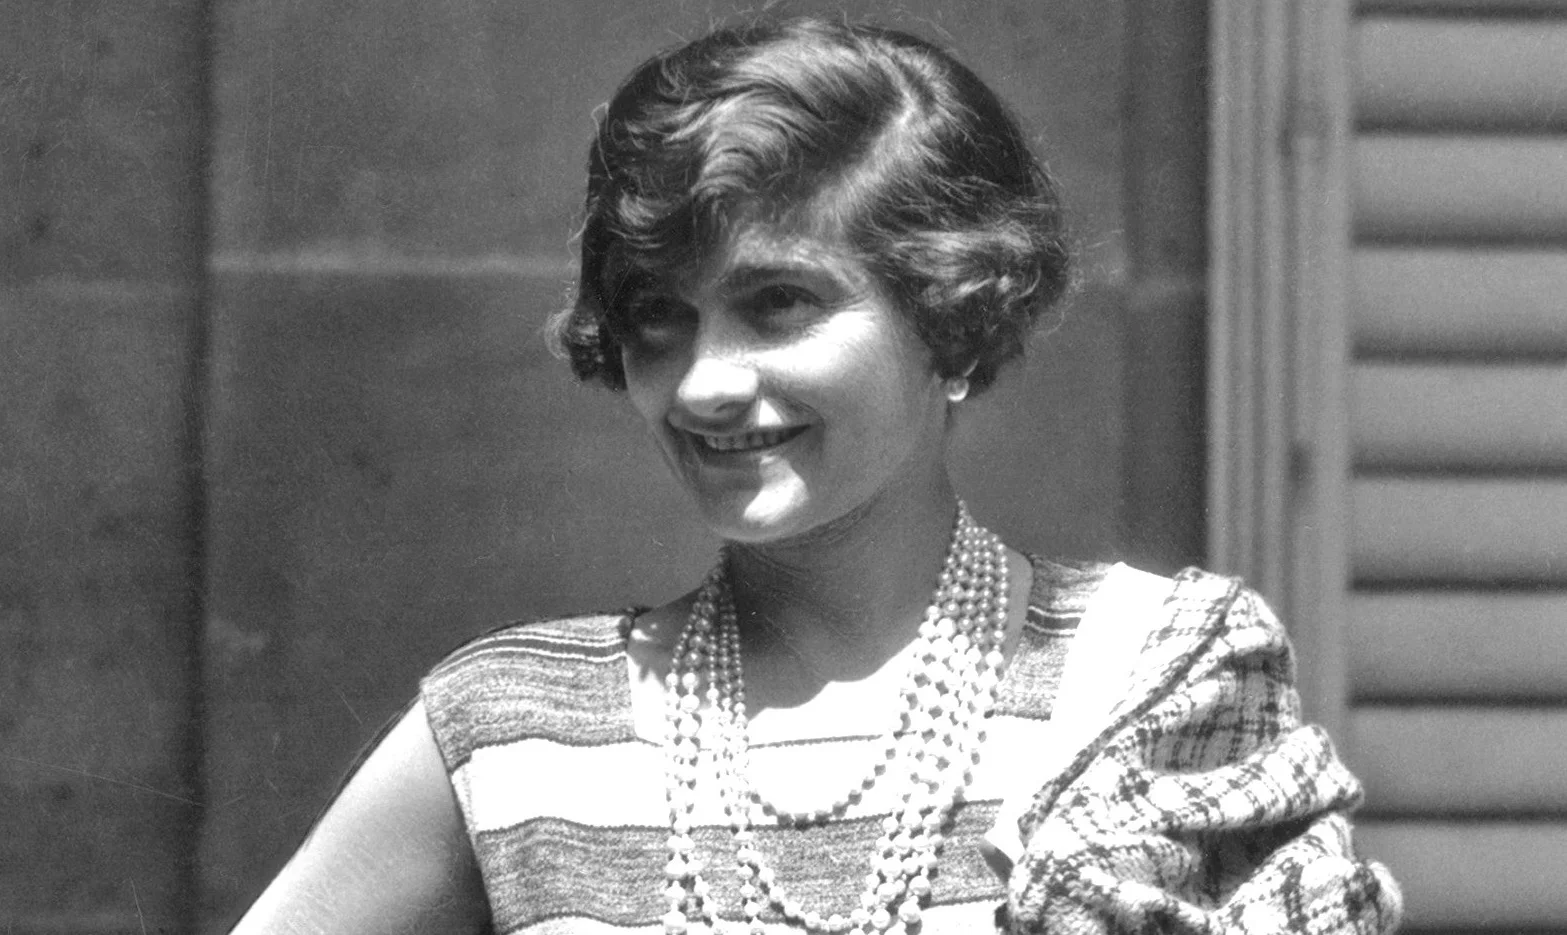 Coco Chanel feature doc picked up by Fremantle for global